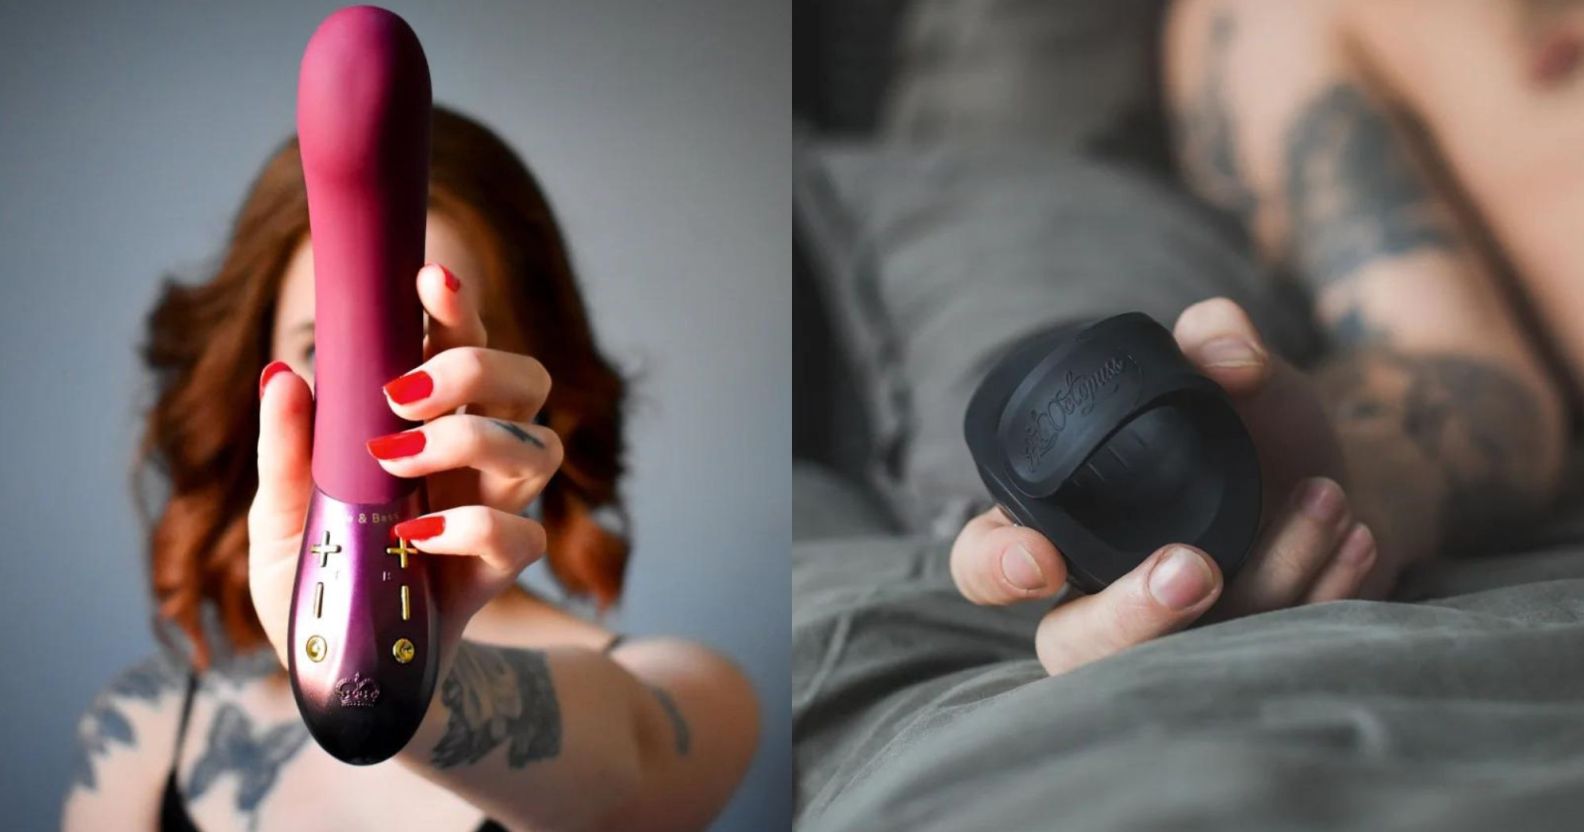 These inclusive high-tech sex toys guarantee sexual satisfaction whatever your kink.